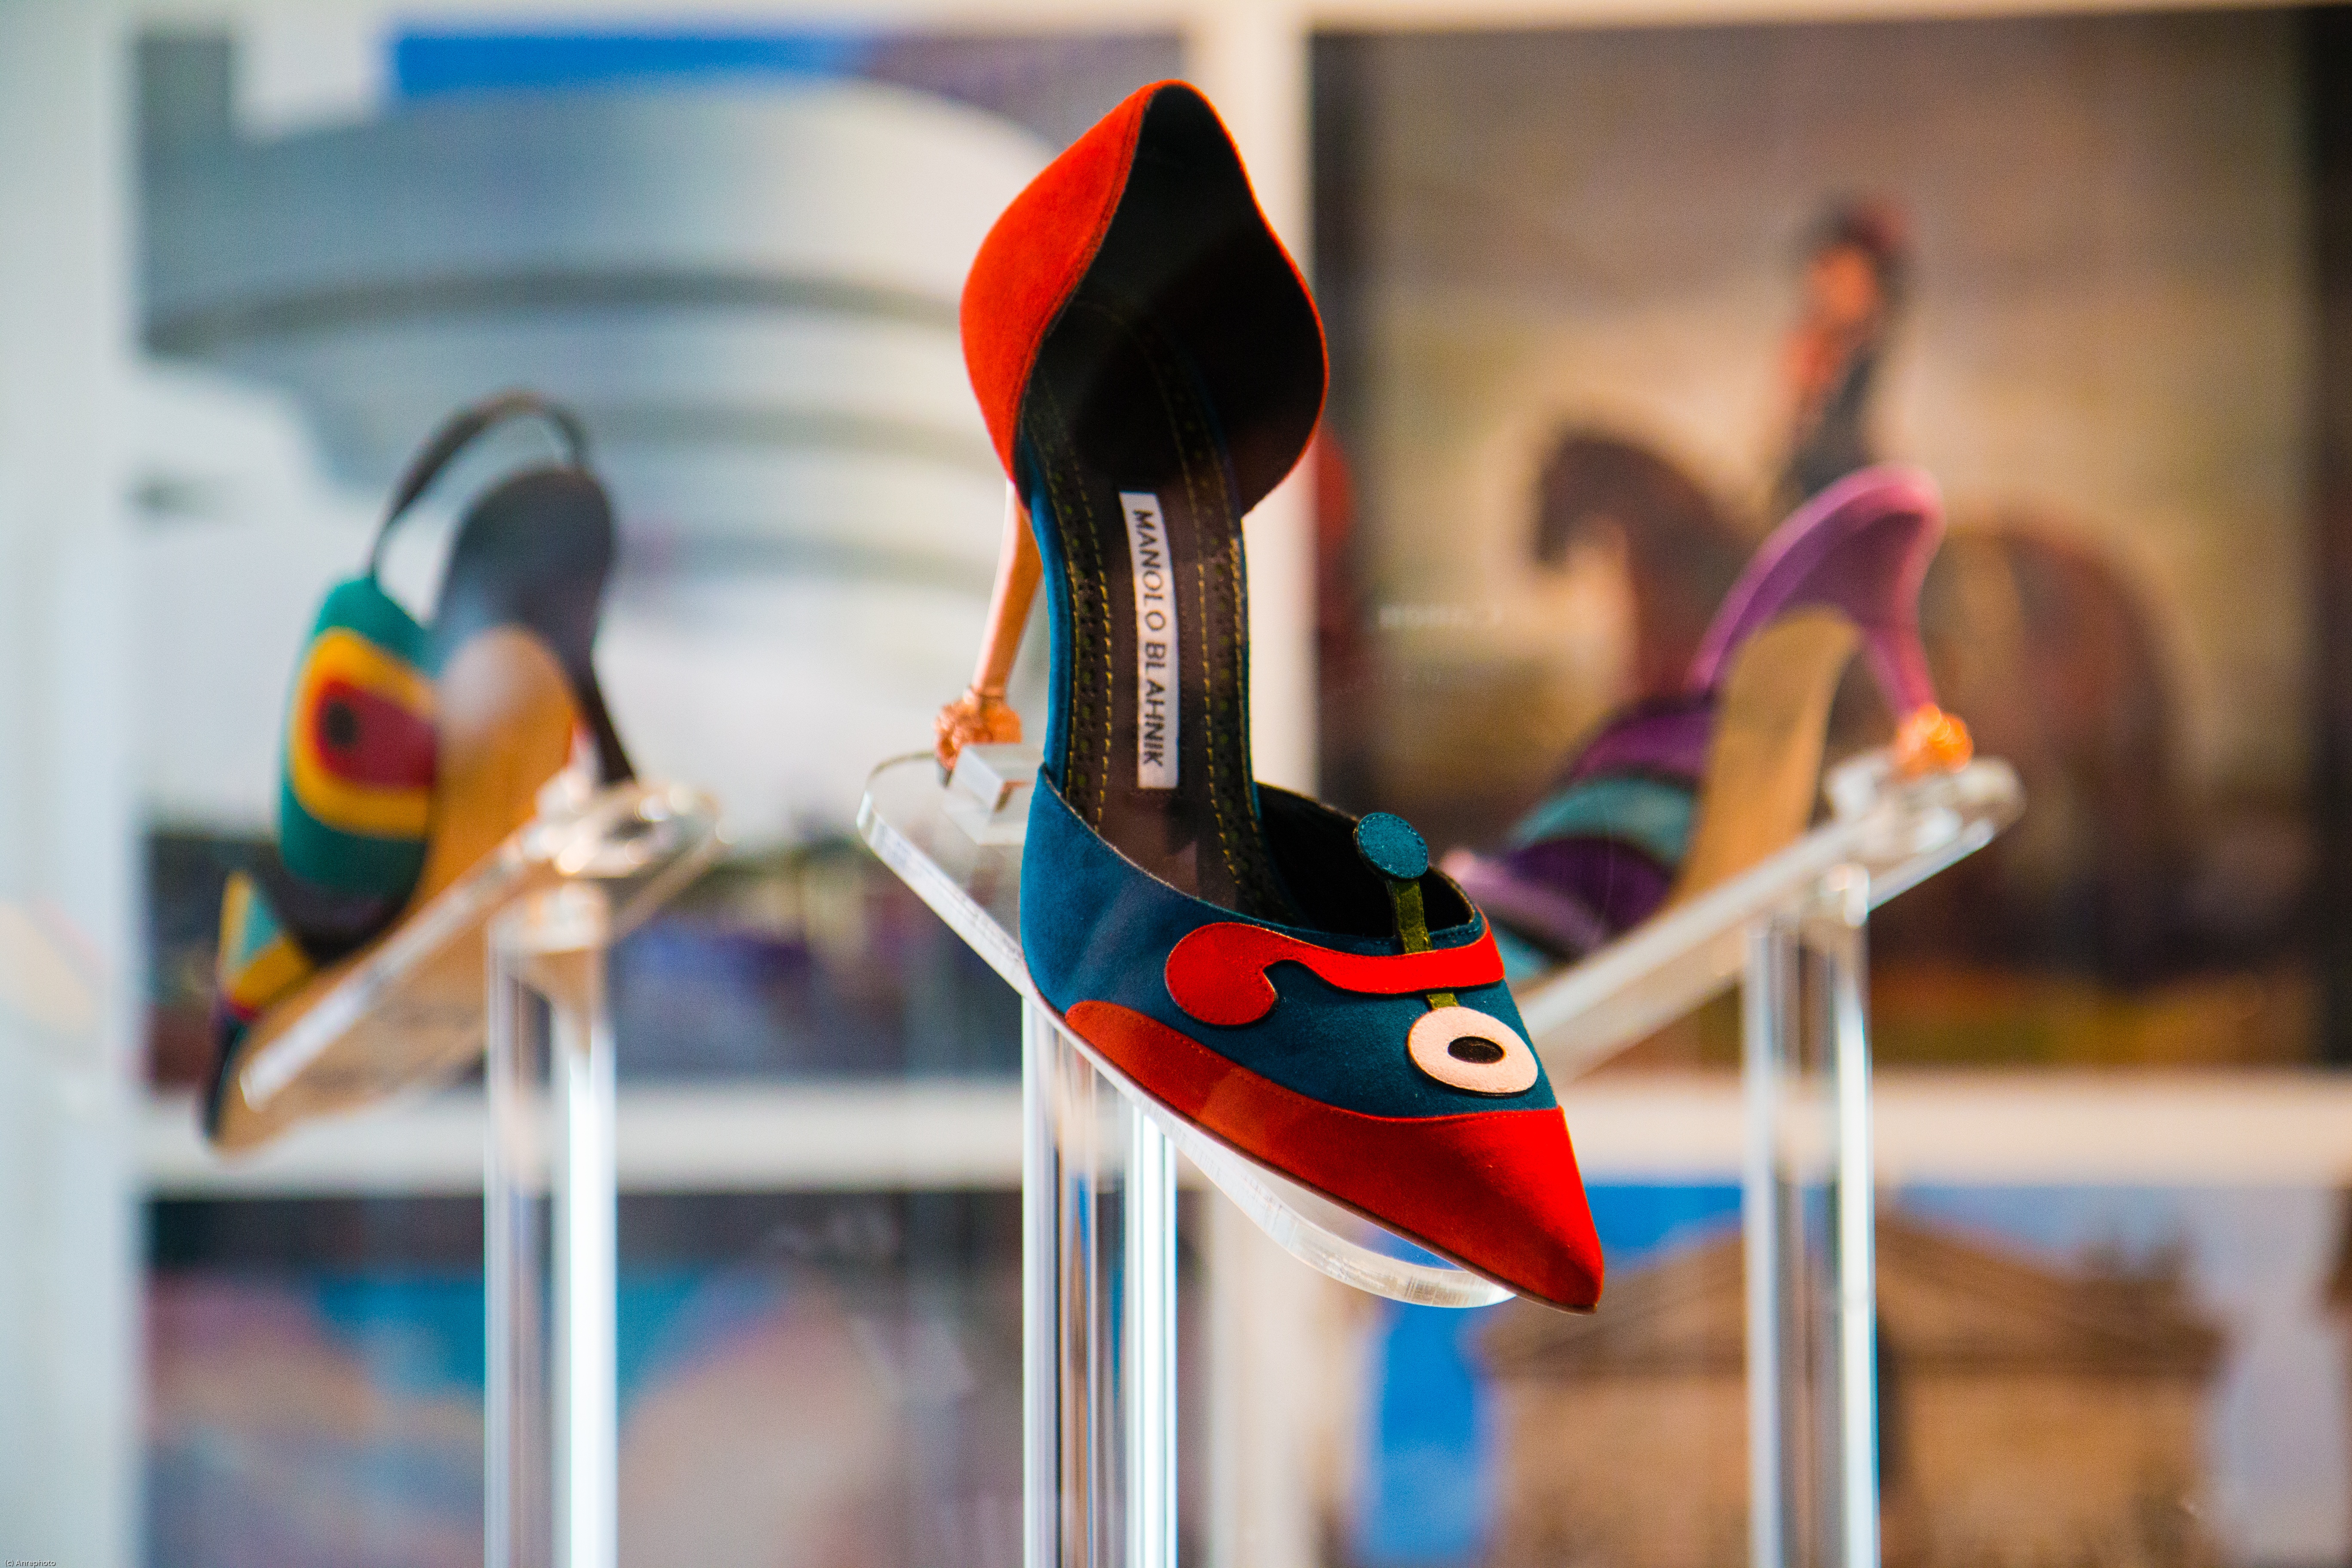 Manolo Blahnik plans to open two more stores in Hong Kong this year. Photo: Shutterstock